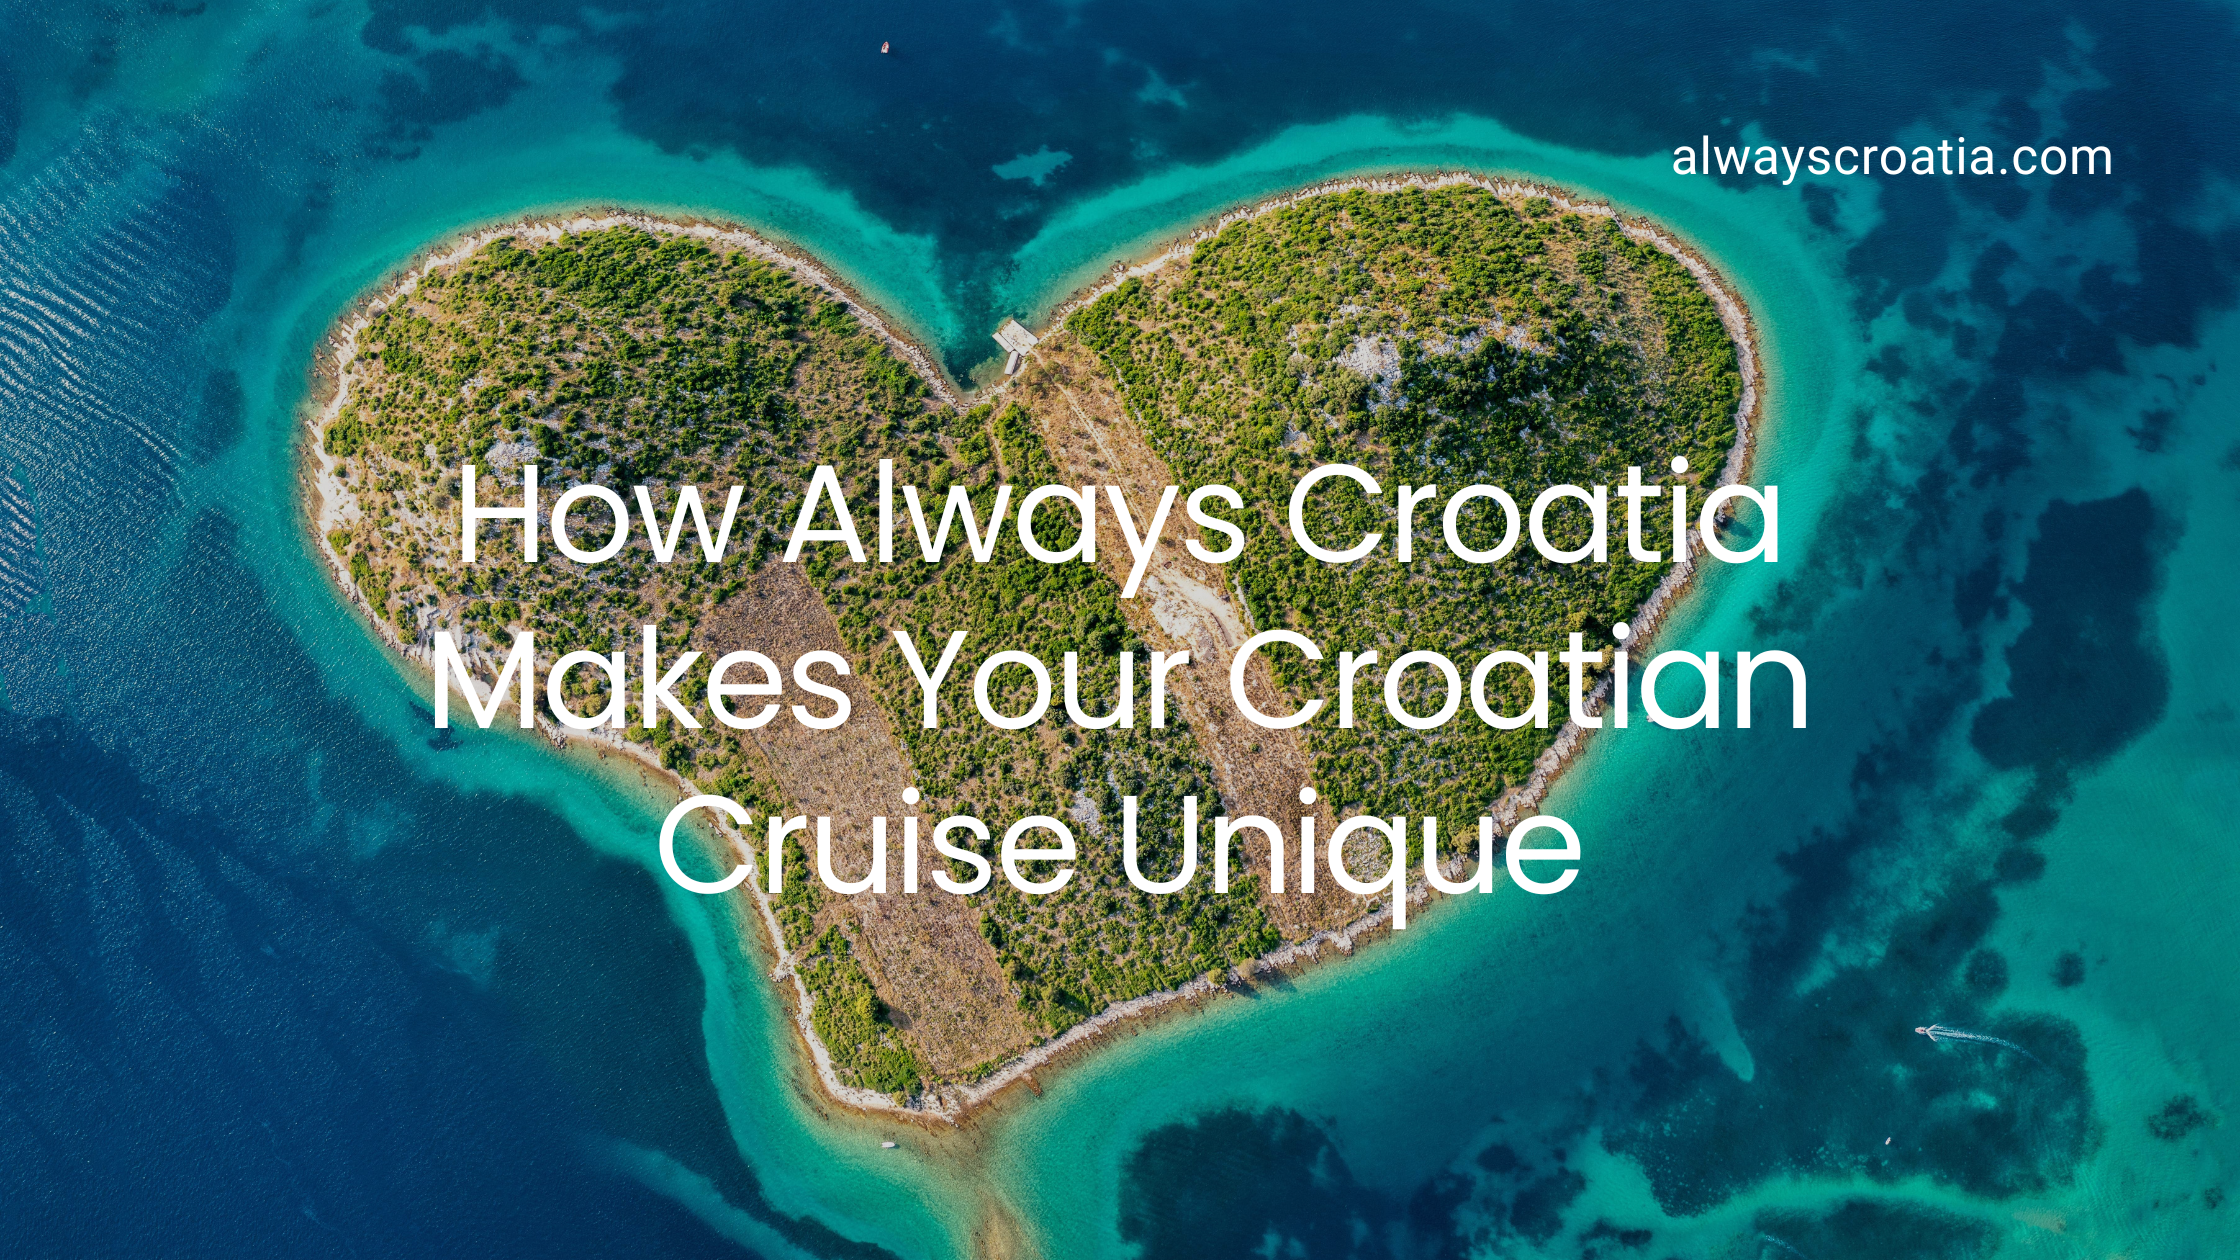 Galesnjak heart-shaped island with the title over it How Always Croatia makes your Croatian Cruise unique